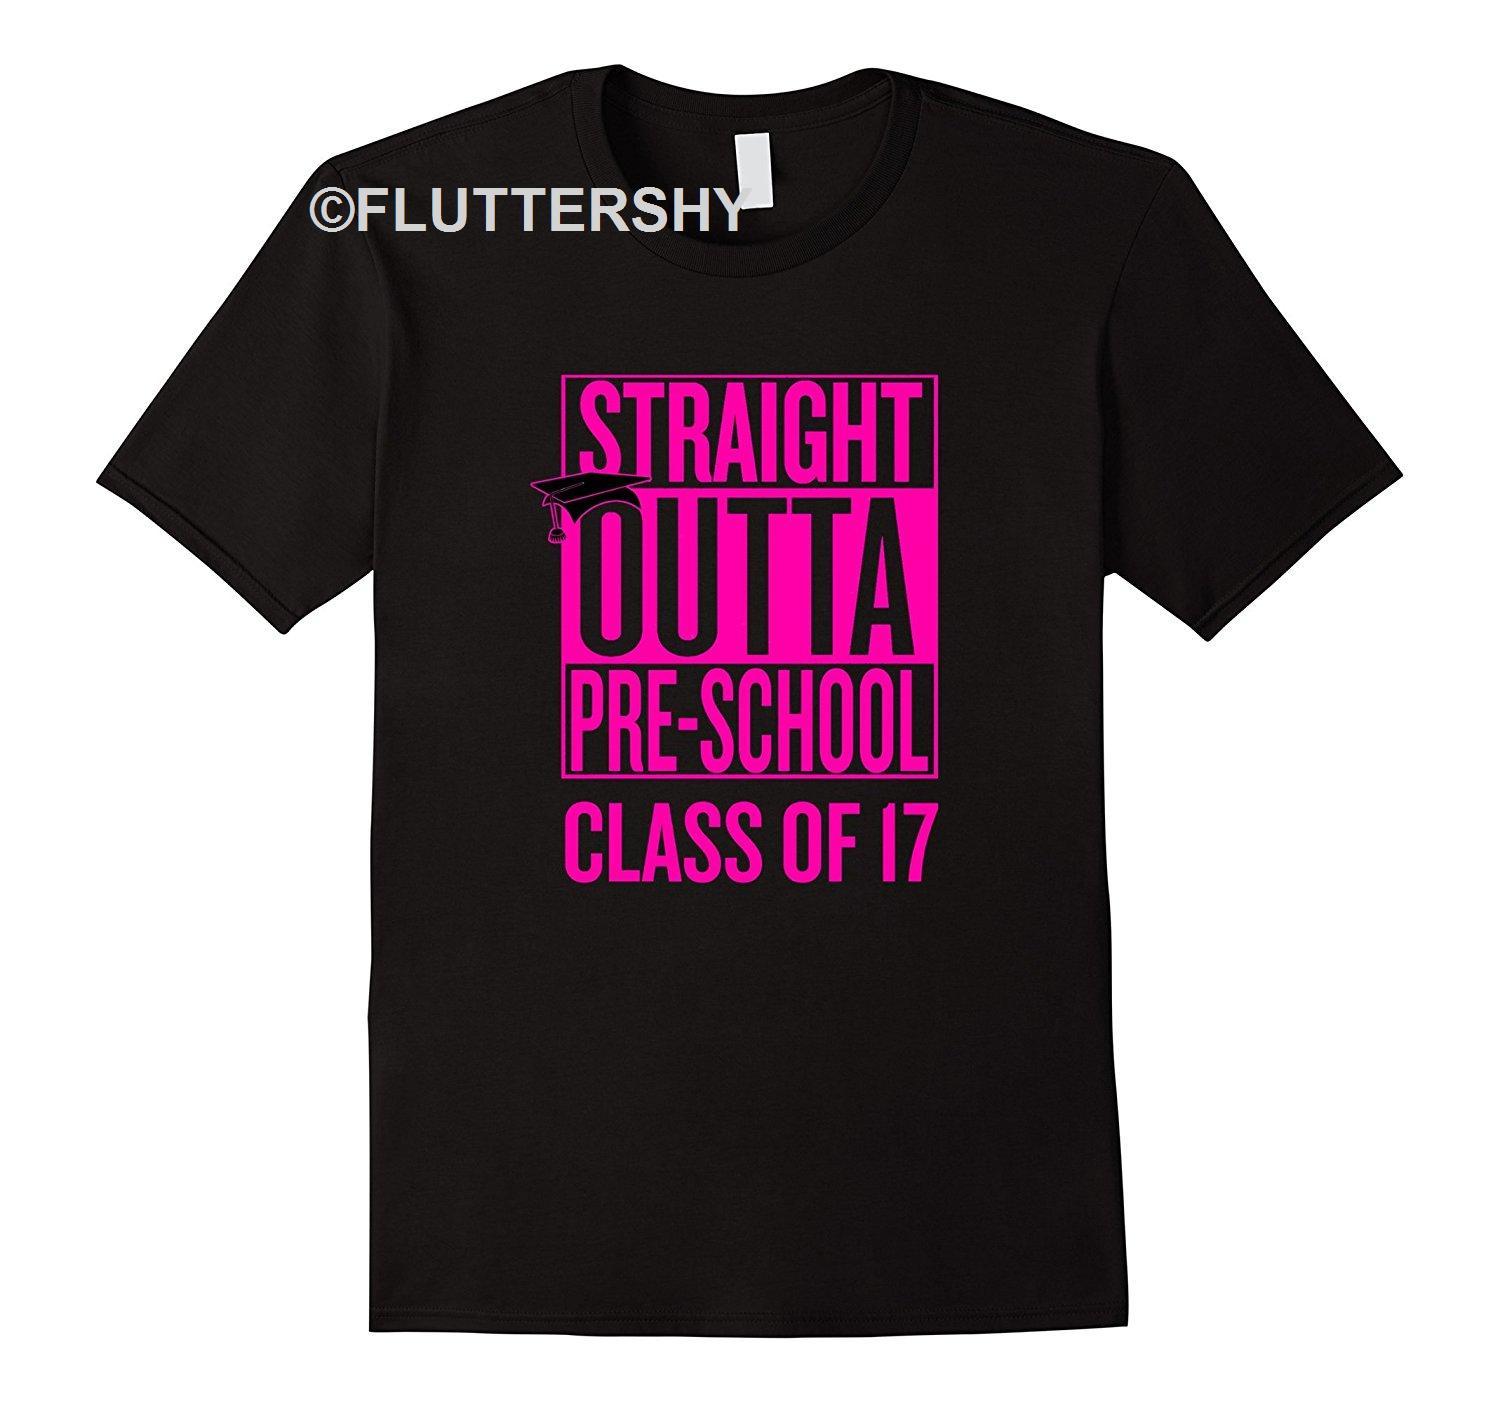 For Fun Get Here Straight Outta Pre-school Graduation Shirt, Pink